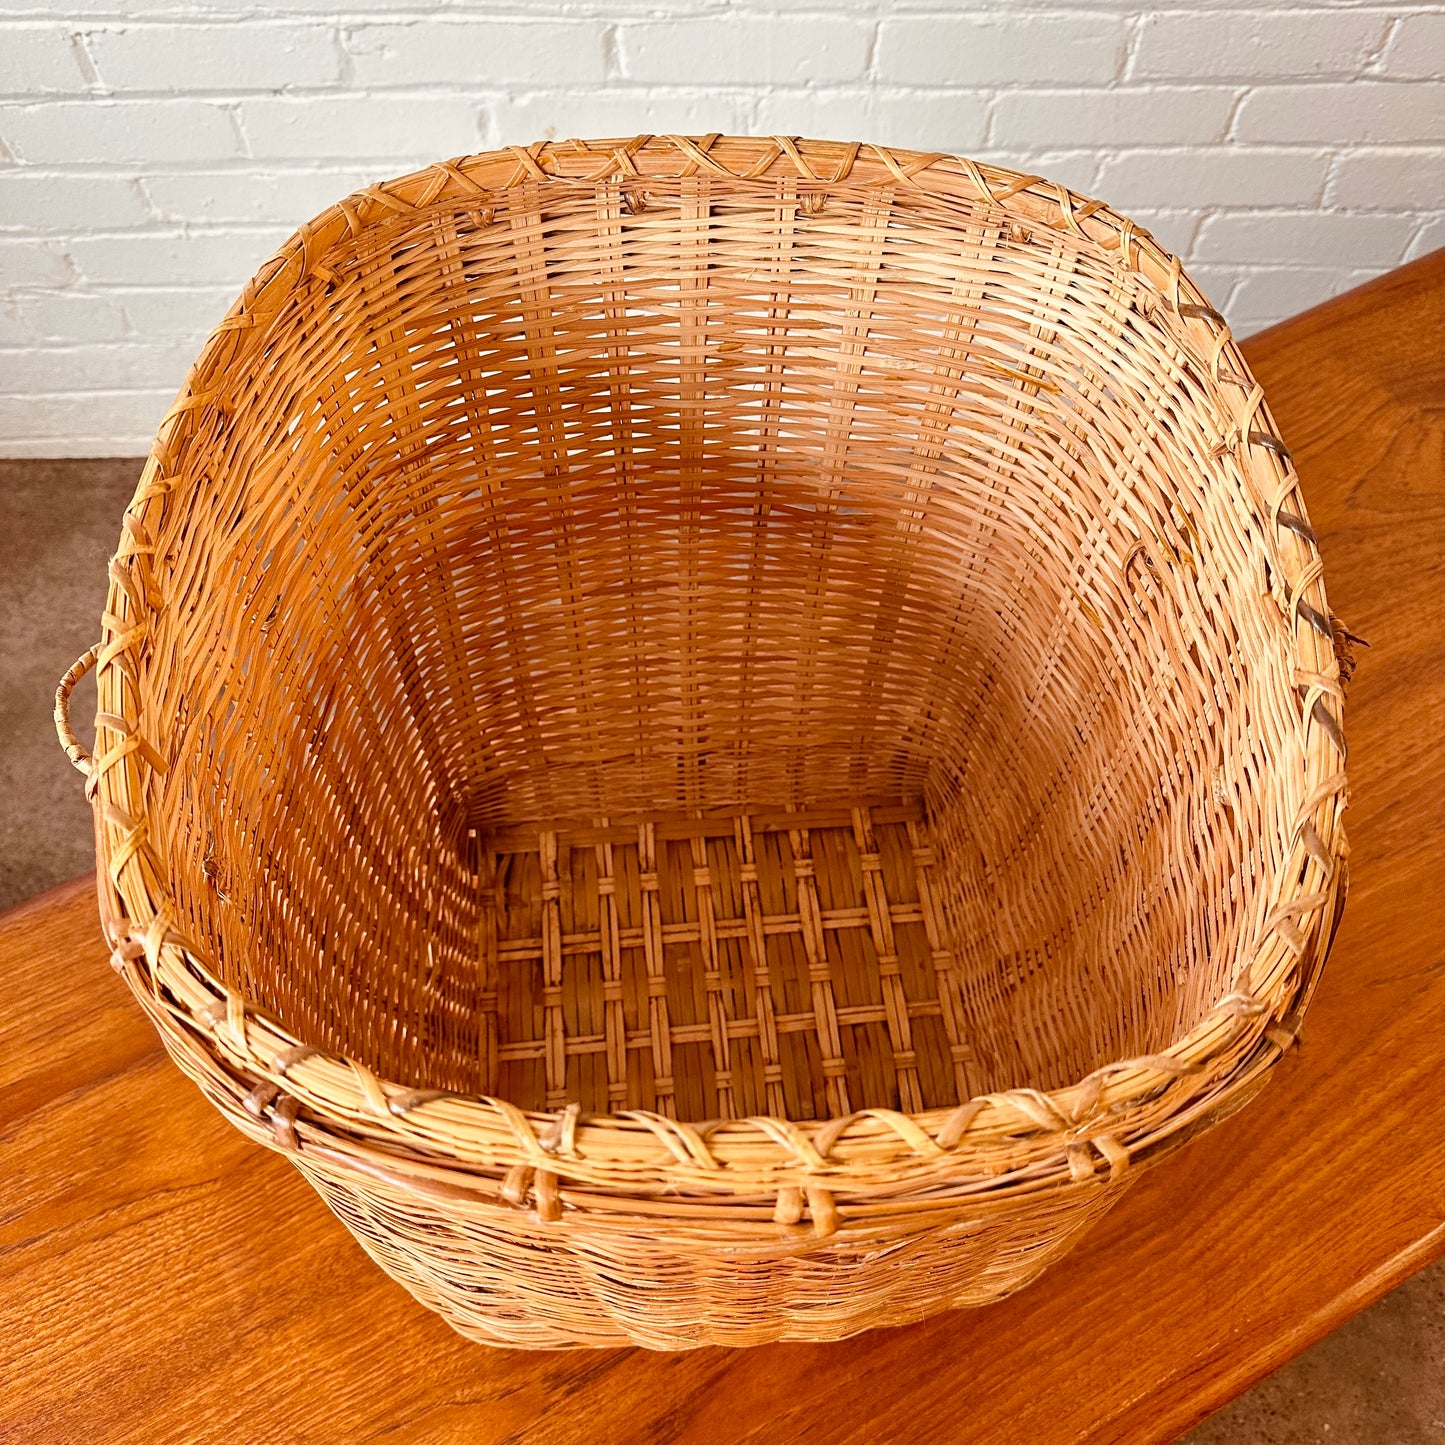 LARGE WOVEN WICKER BASKET WITH HANDLES AND LID